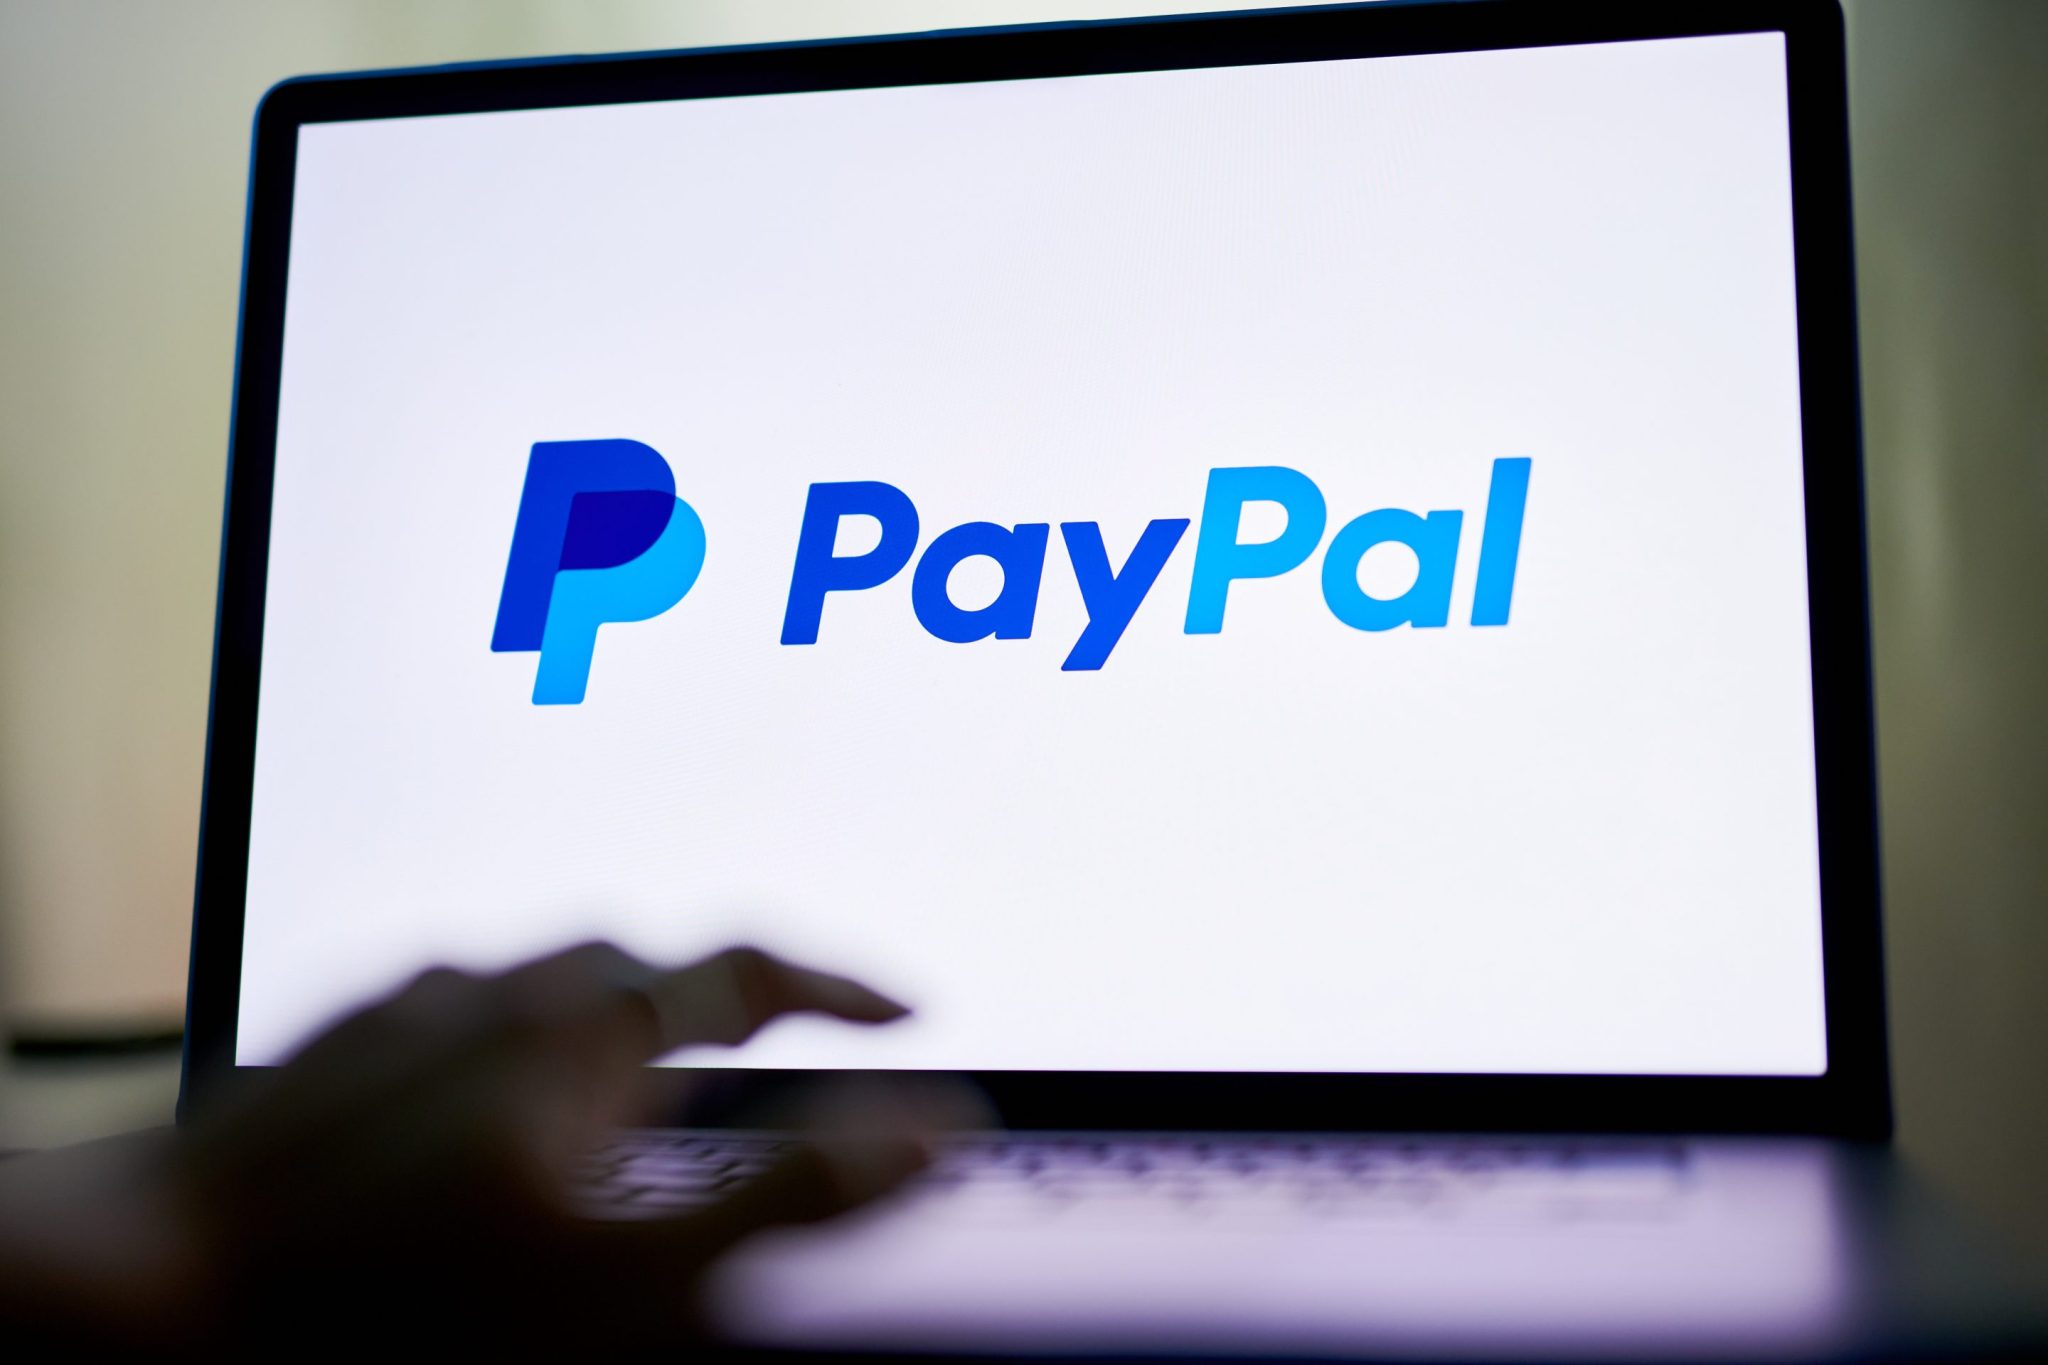 PayPal discloses it was subpoenaed by the SEC over recently launched stablecoin